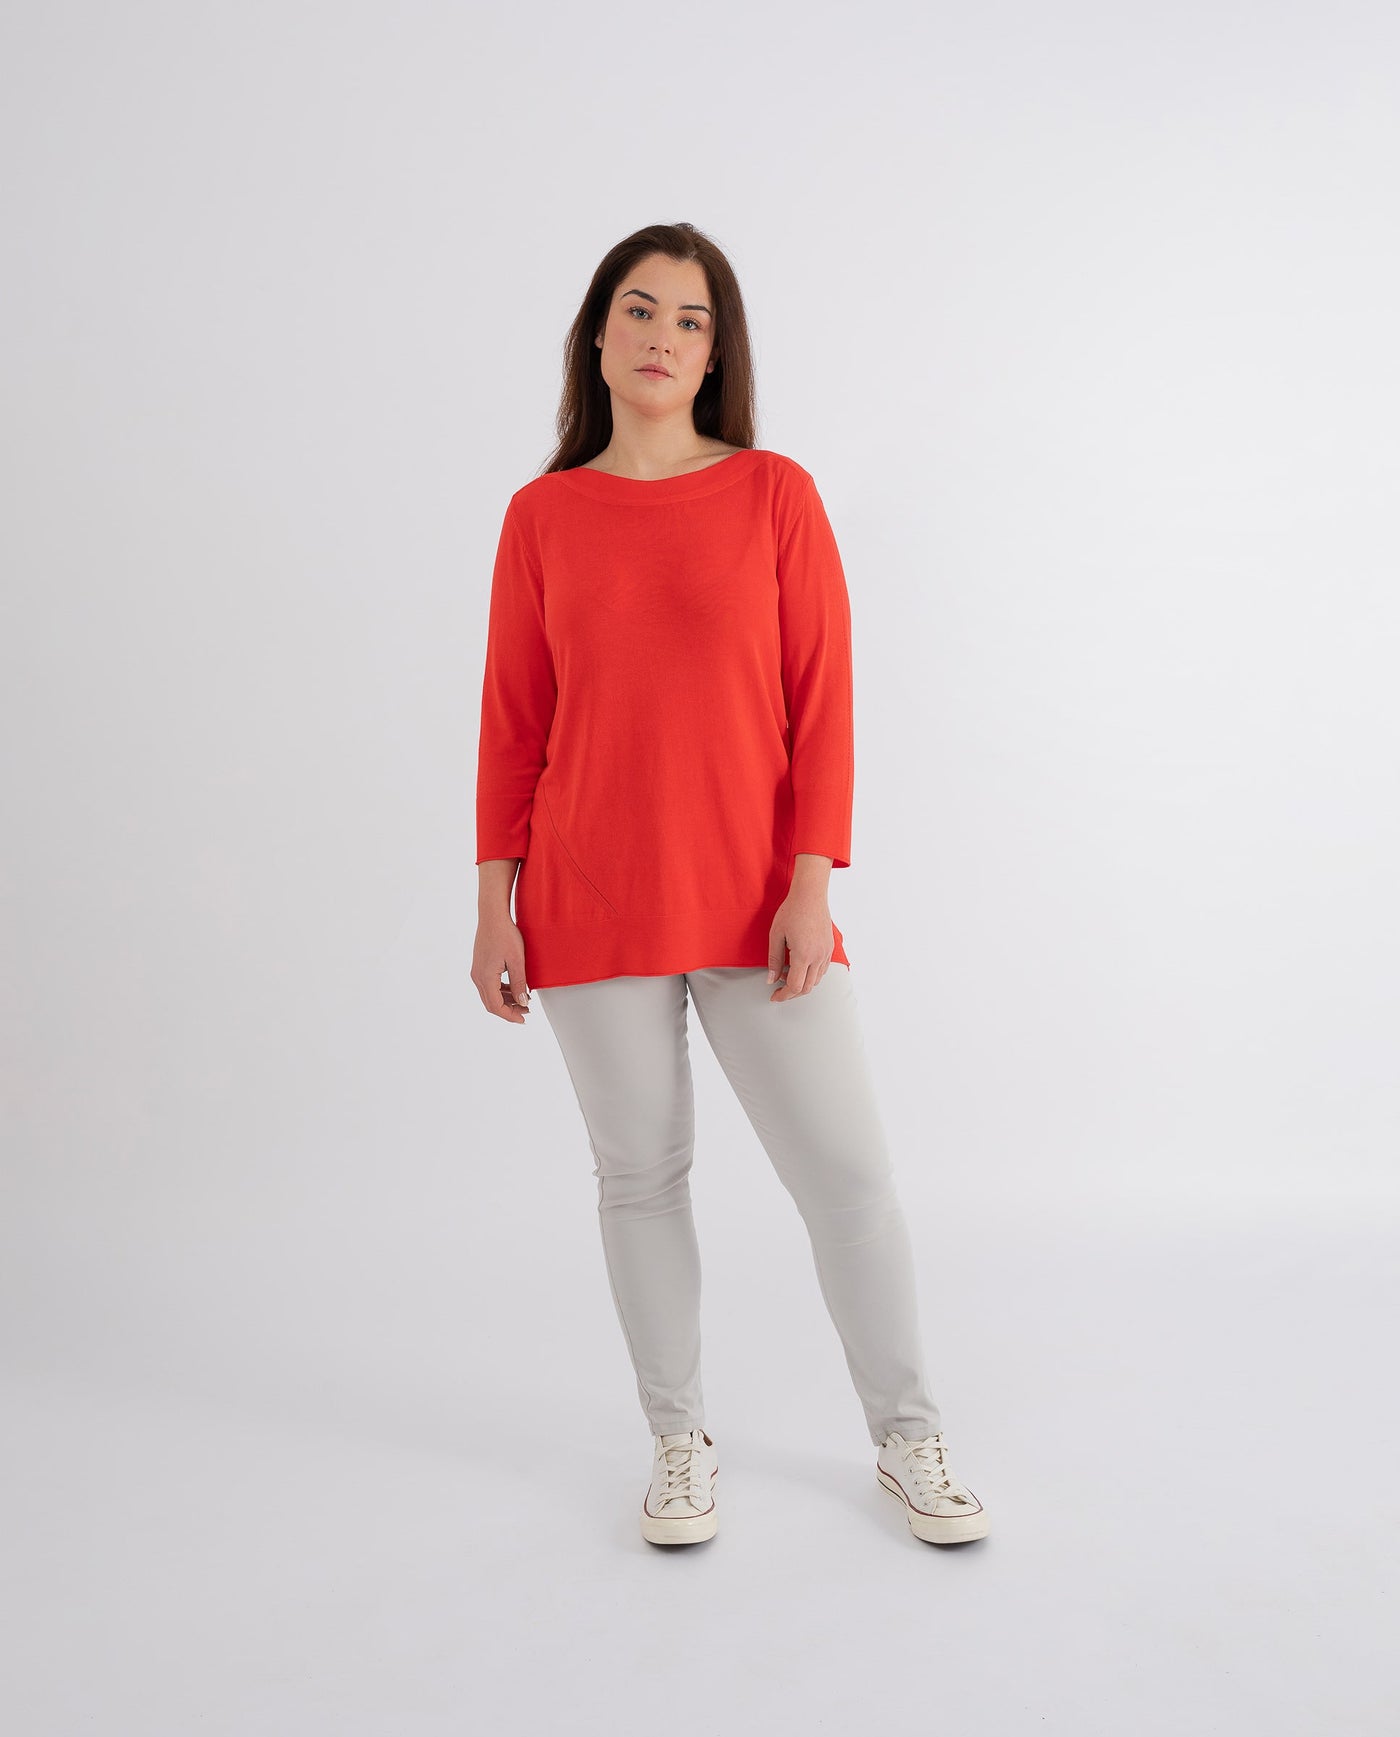 CORAL BOAT NECK SWEATER